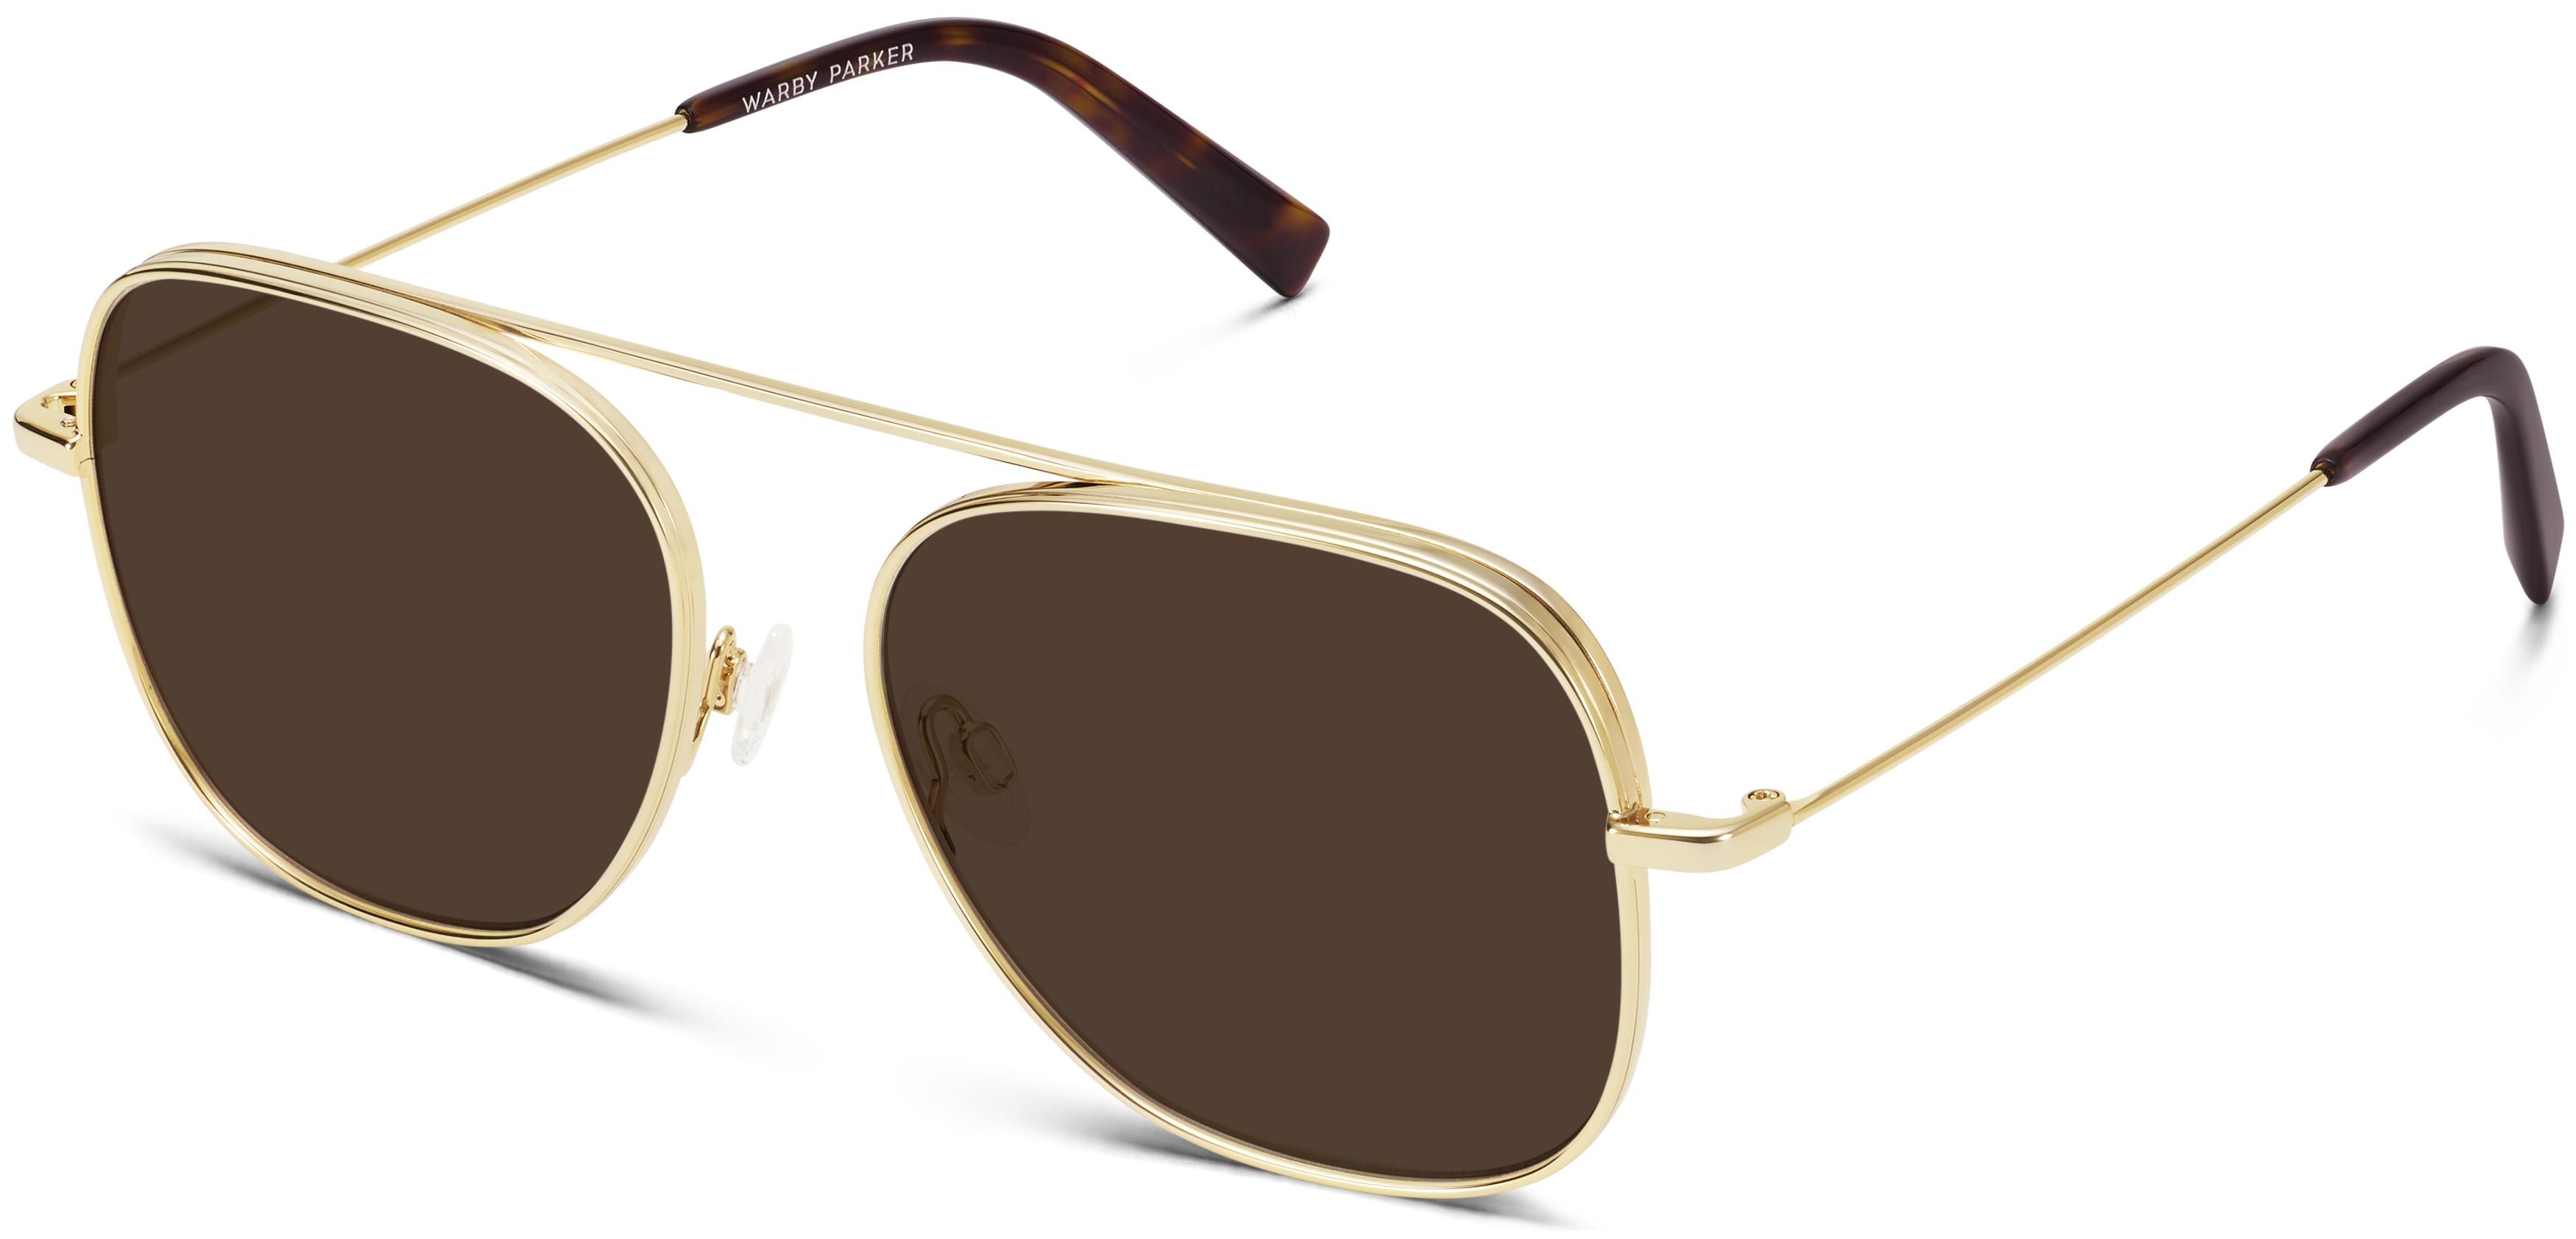 Sade Sunglasses in Polished Gold | Warby Parker | Warby Parker (US)